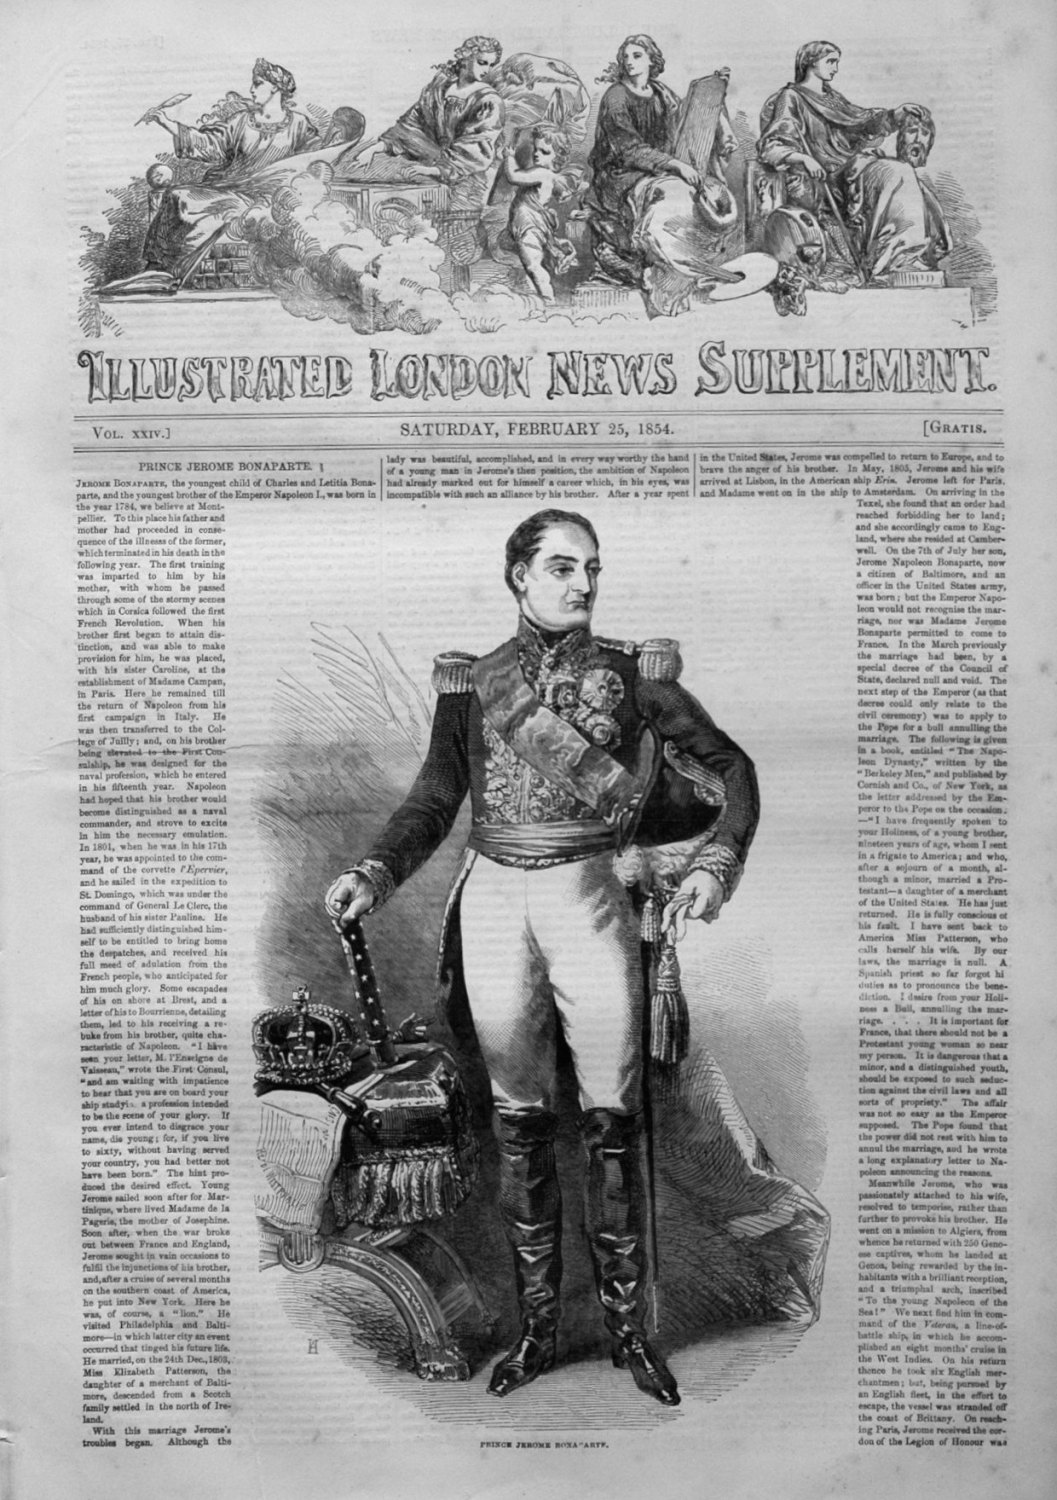 Illustrated London News (Supplement) for February 25th 1854.